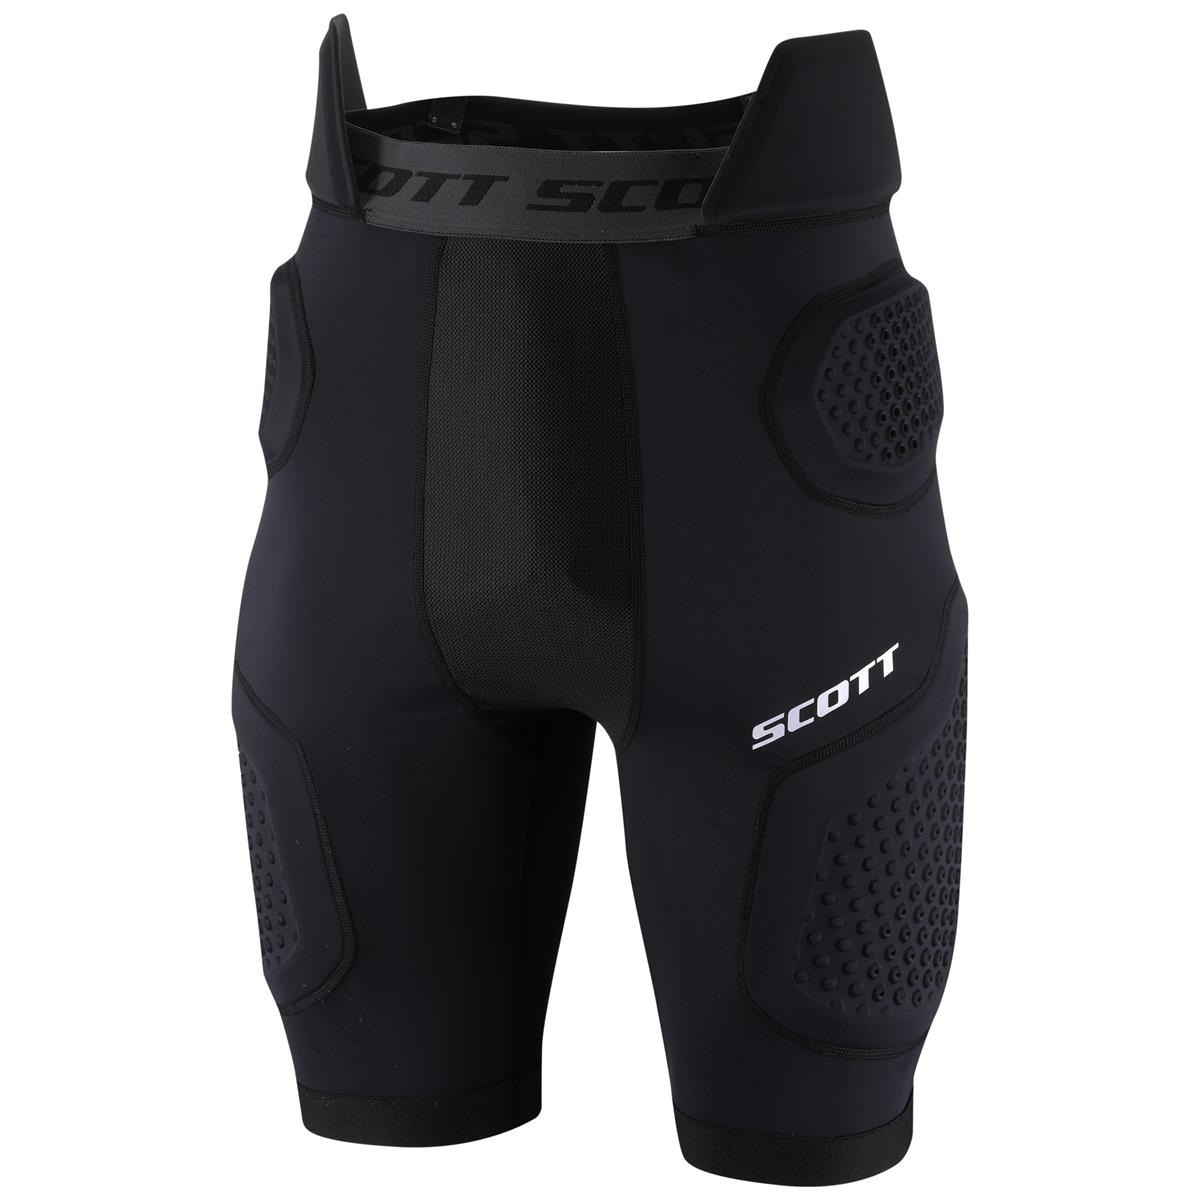 Short protector Softcon air black - Size XL